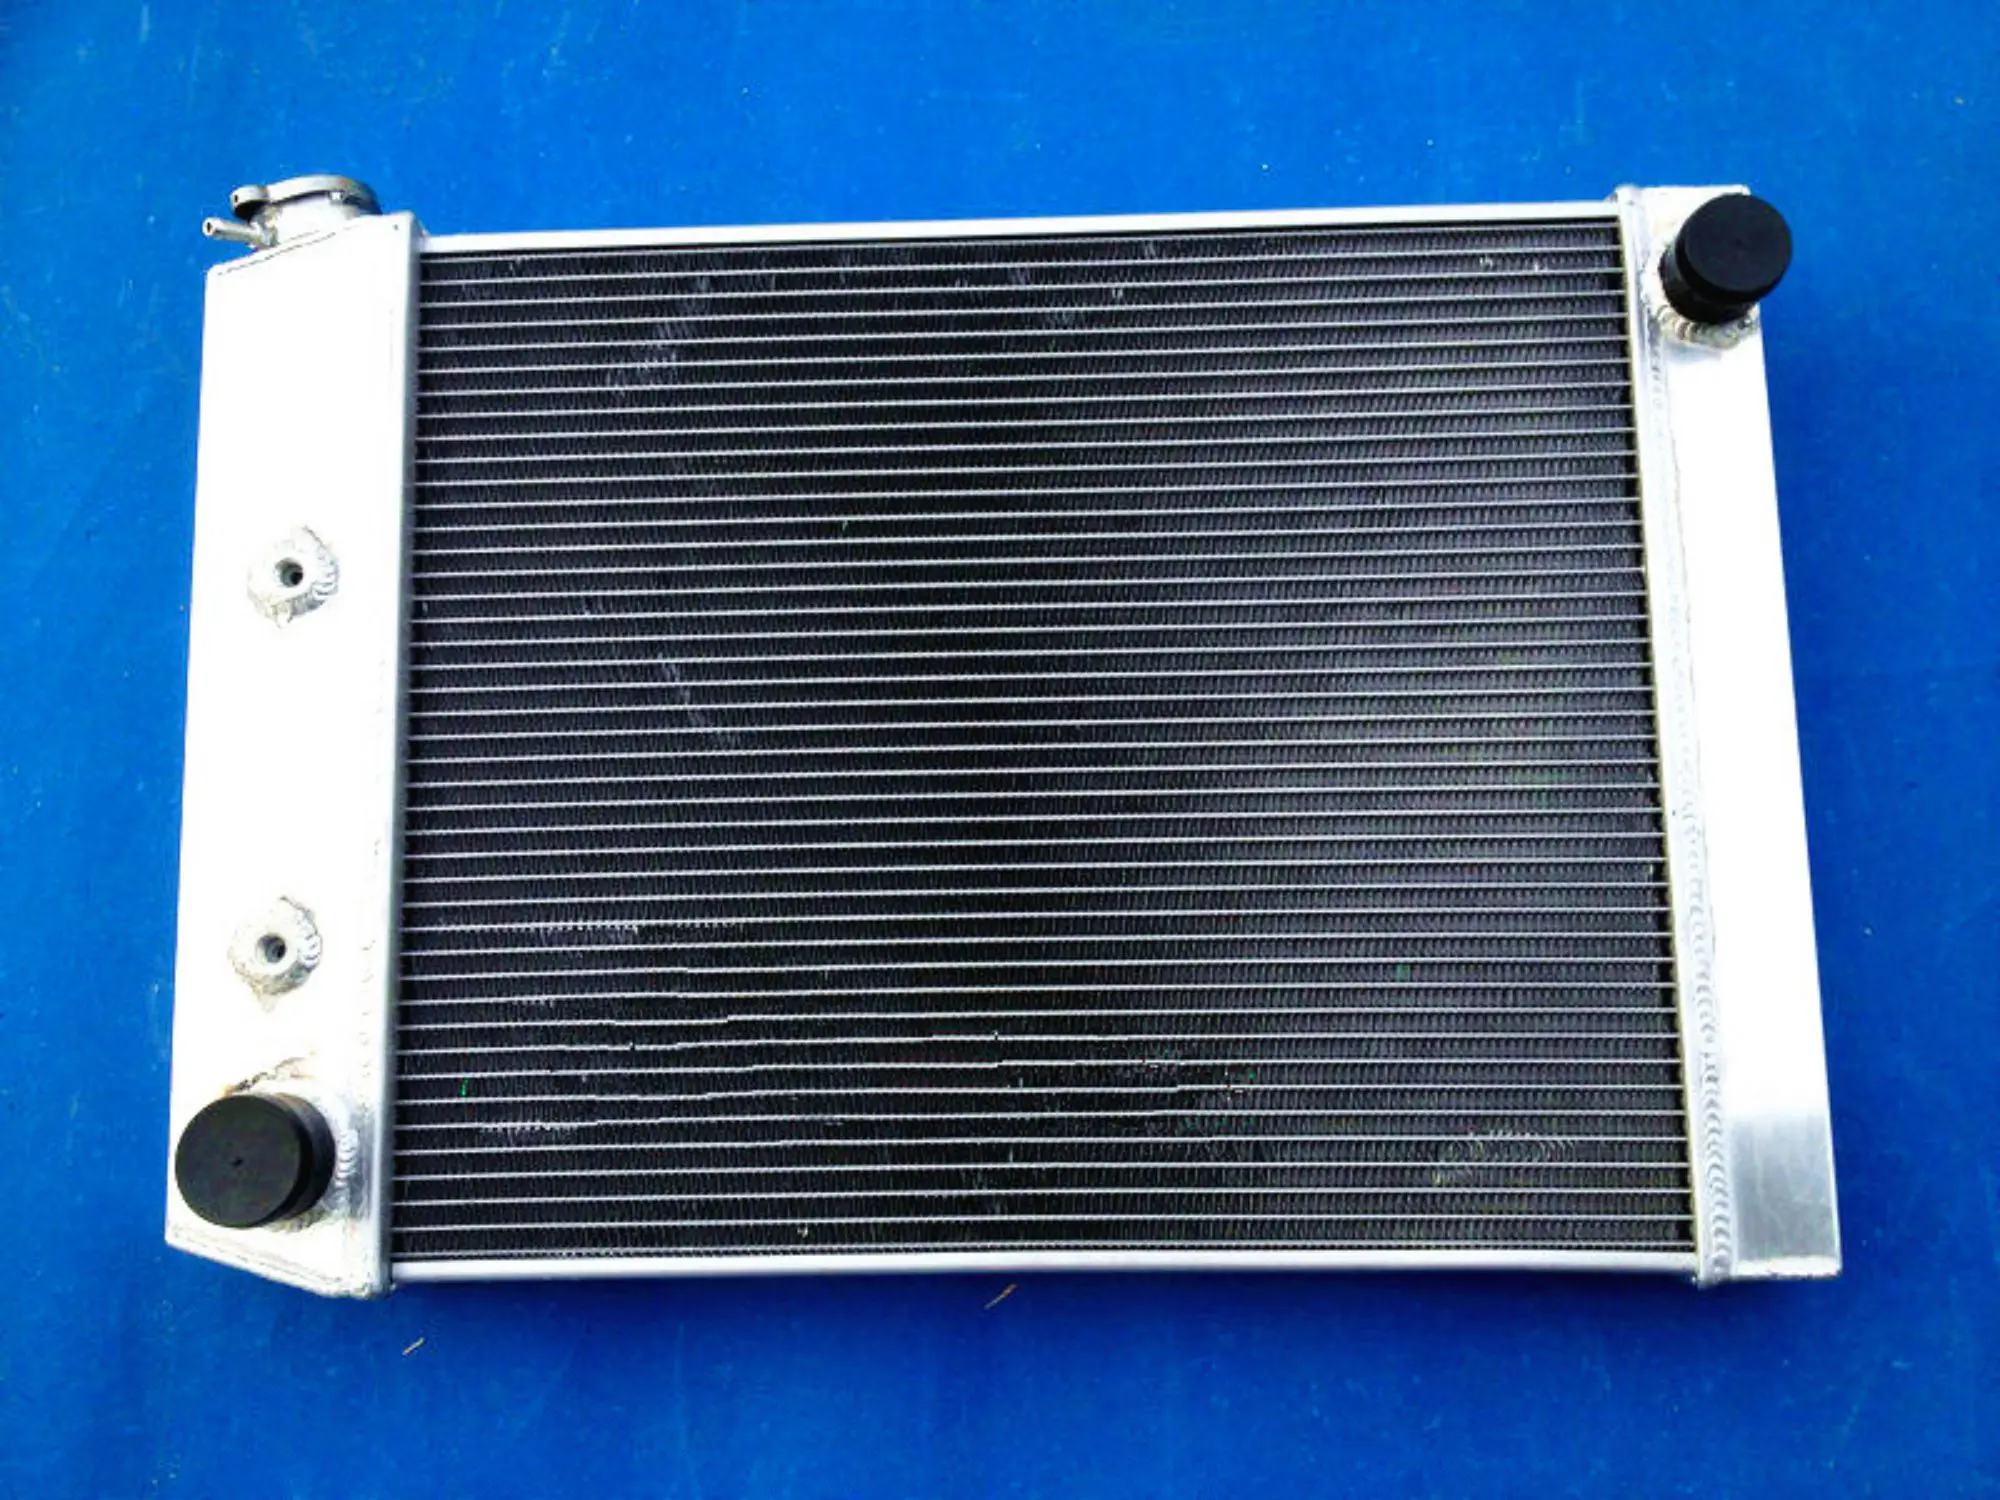 

3ROW Aluminum Radiator for Ford Cortina 6 Cylinder TC TD TE TF 72-82 AT/MT 72 73 74 75 76 77 78 79 80 81 82